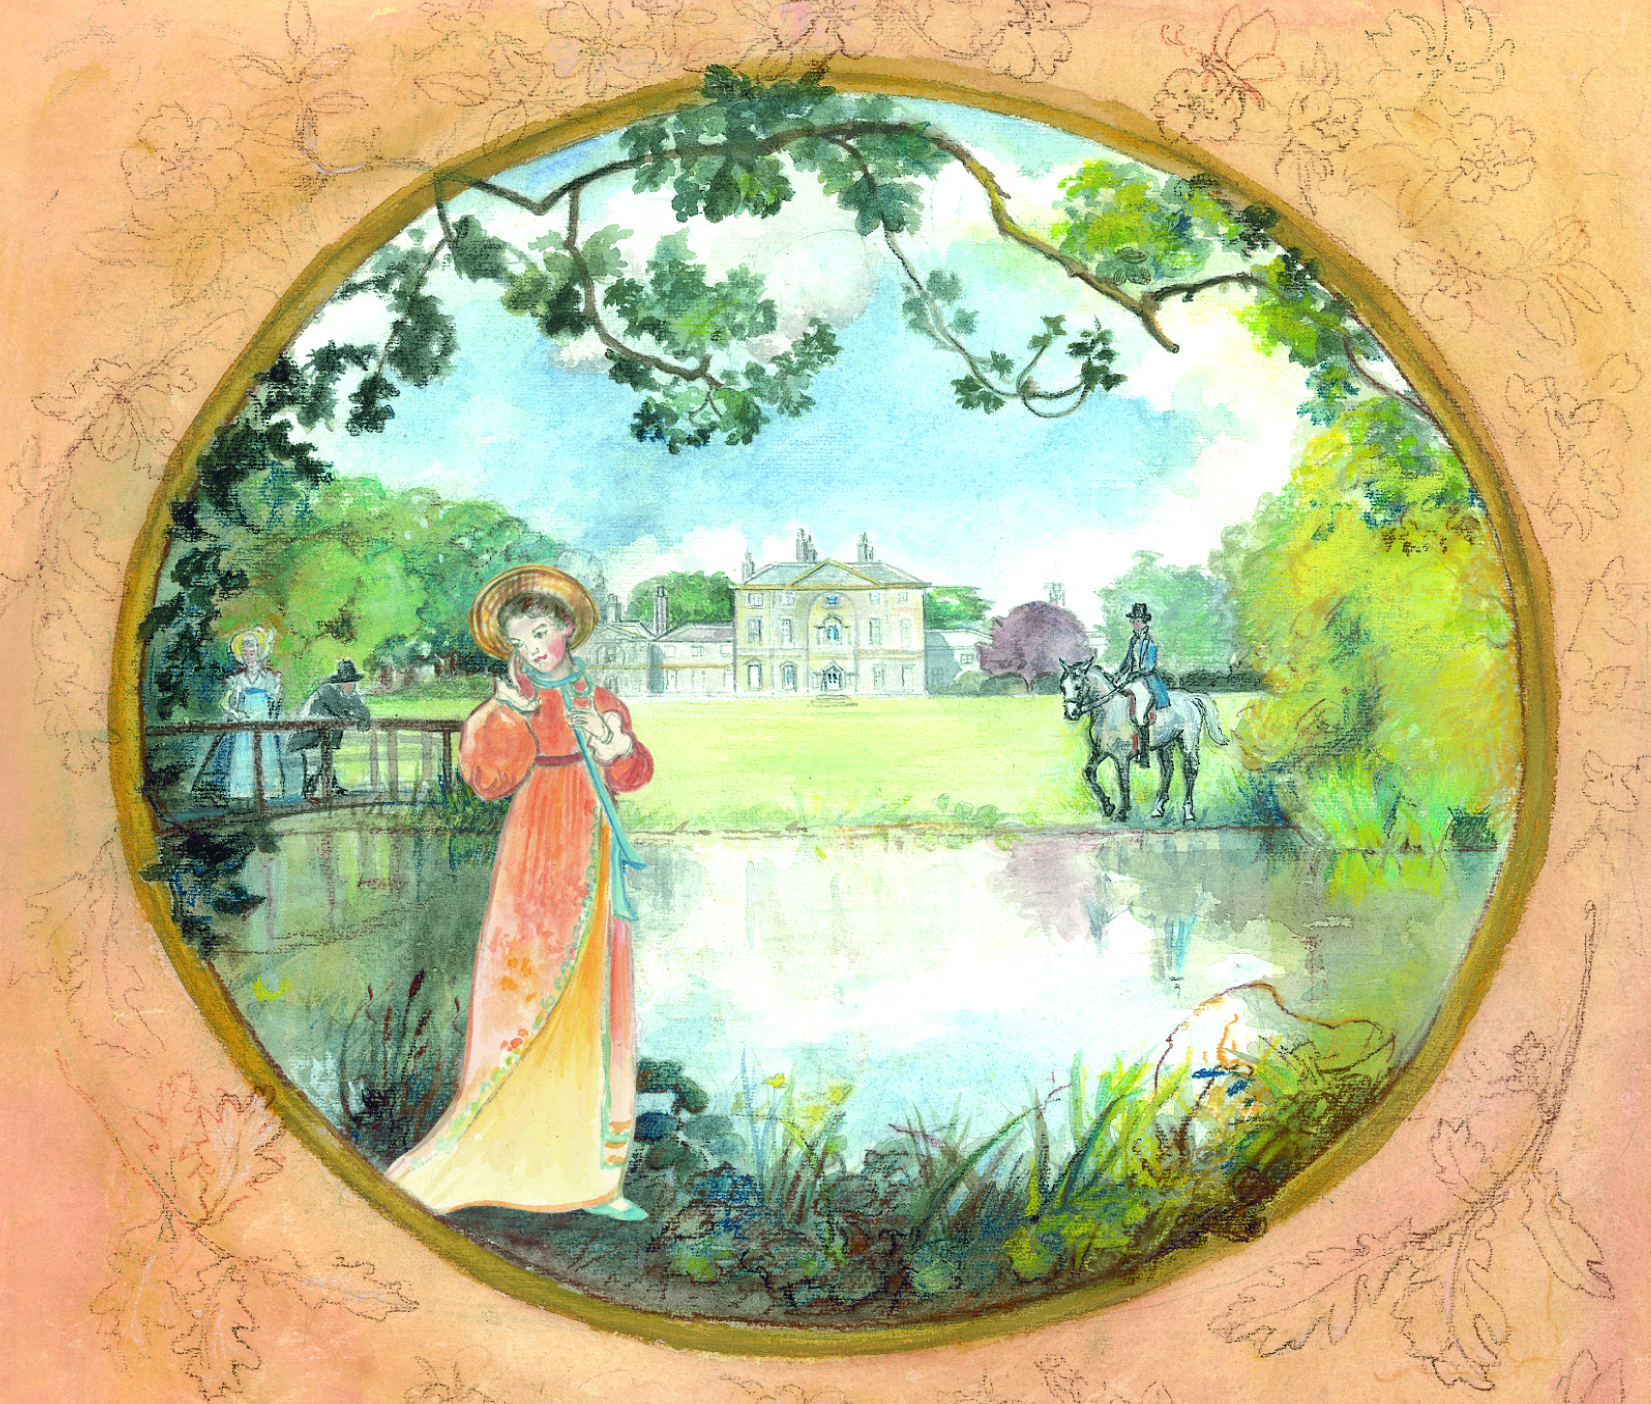 They crossed it by a simple bridge - Jane Austen card on sale at Winchester Cathedral gift shop.